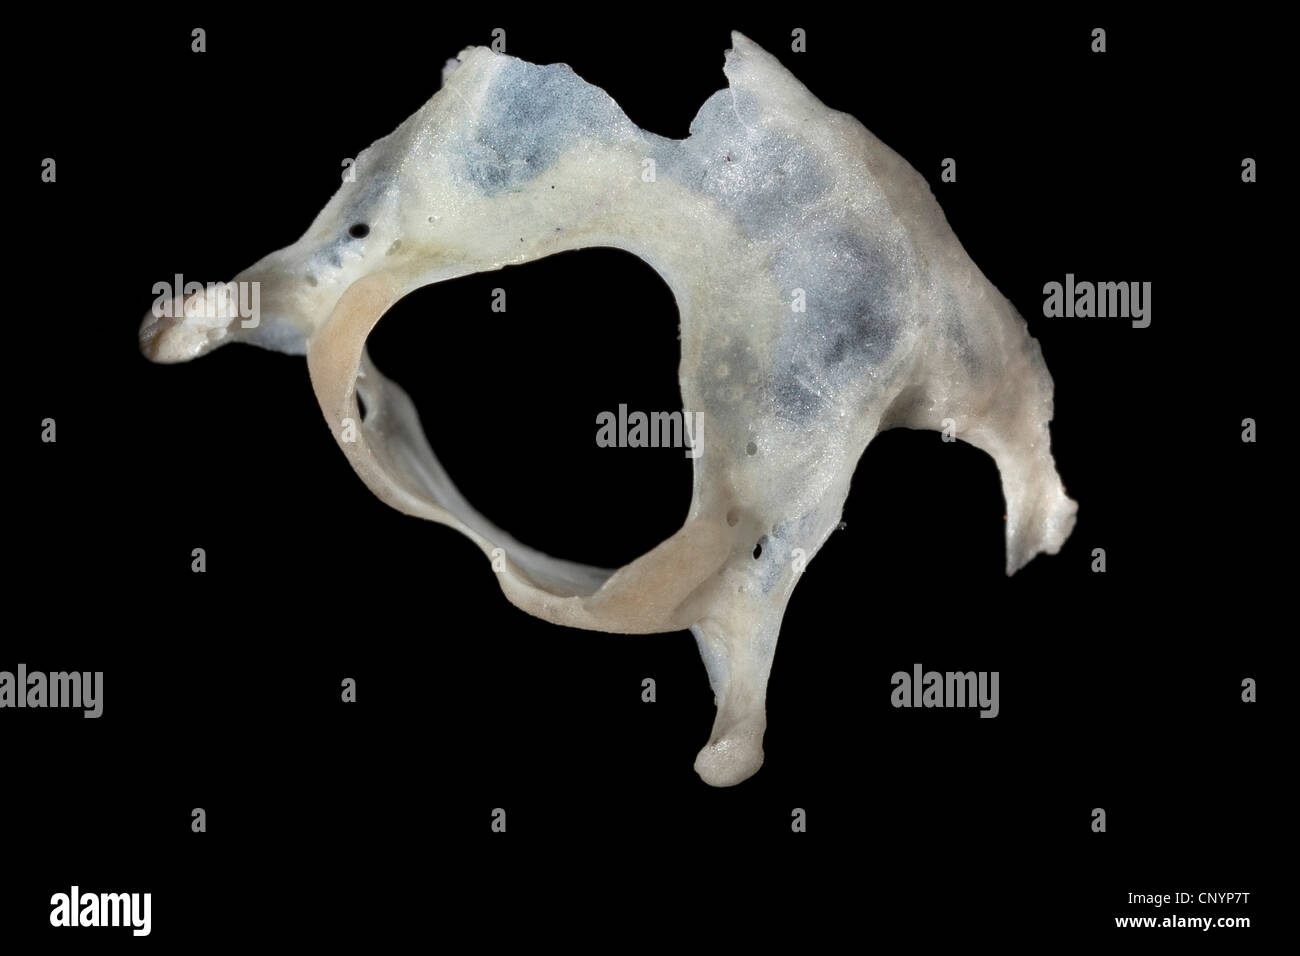 Barn owl (Tyto alba), cervical vertebra of a mouse, undigested food residue from a pellet Stock Photo